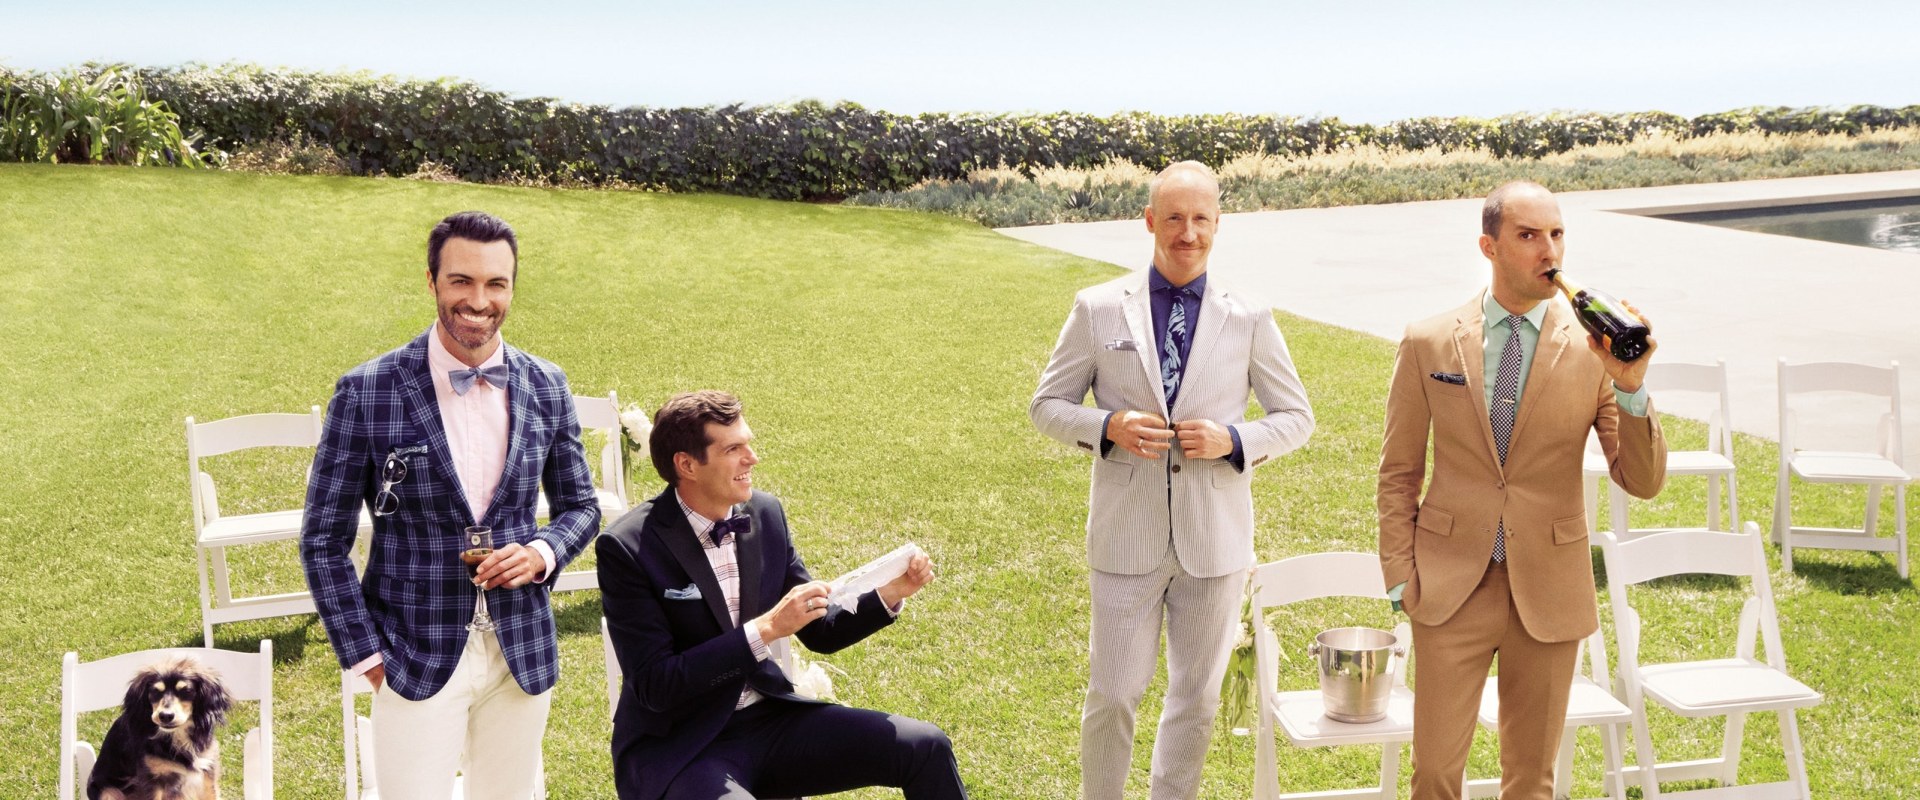 A Guide to Destination Weddings: Everything You Need to Know About Groom Attire